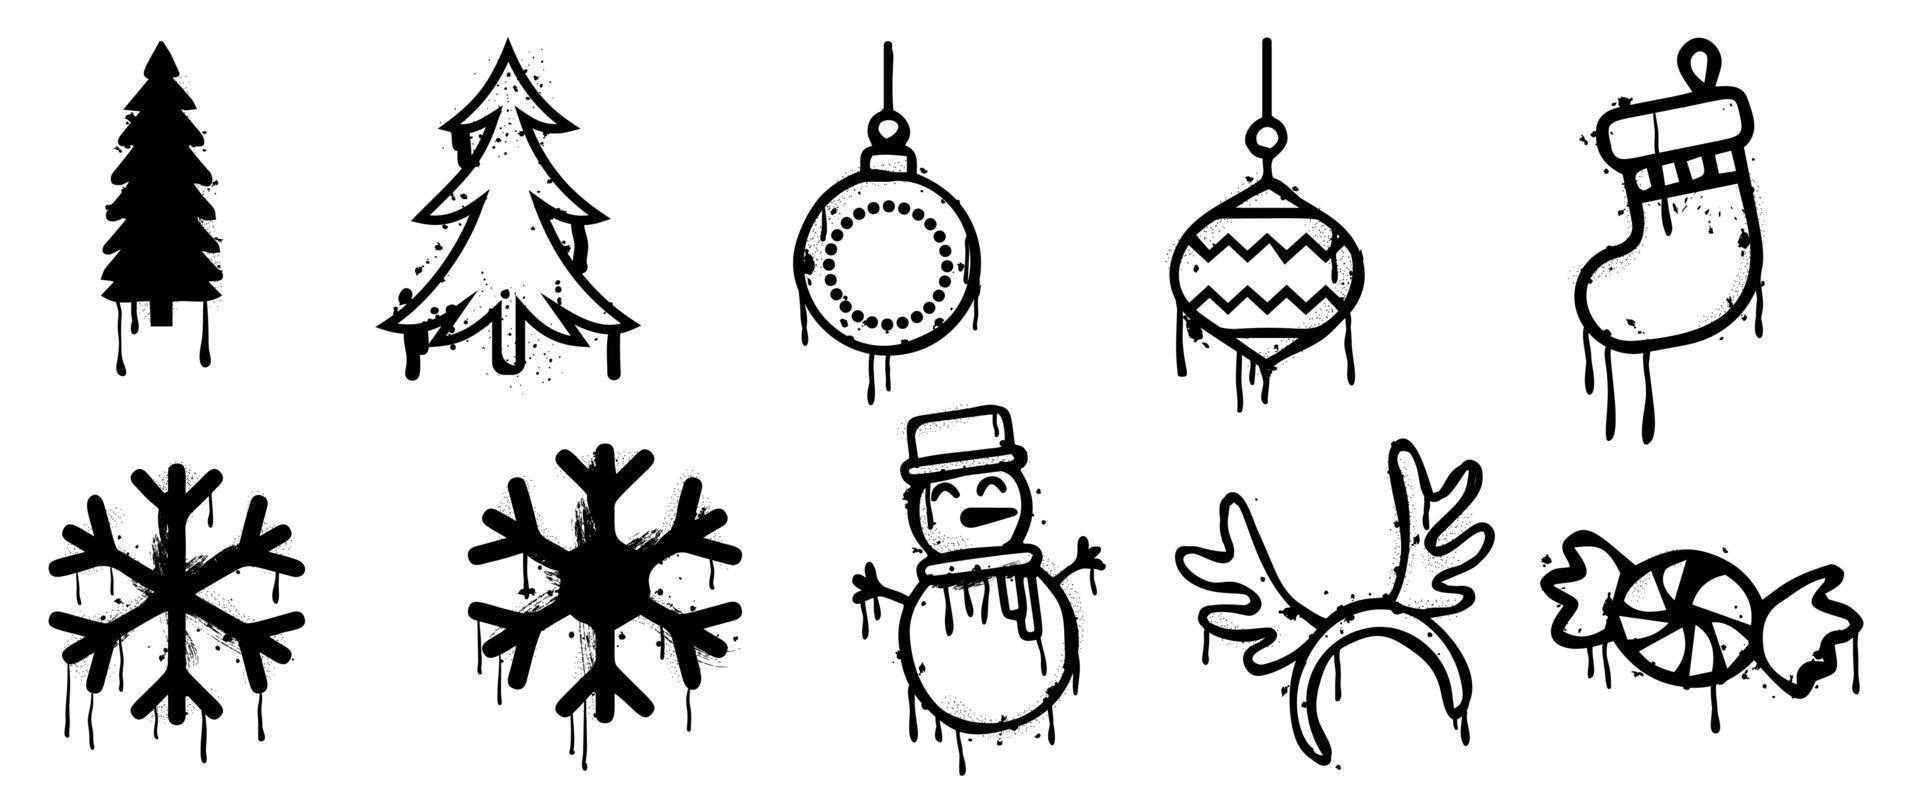 Set of christmas elements spray paint vector. Graffiti, grunge elements of pine tree, bauble, snowflake, snowman, sock, candy on white background. Design illustration for decoration, card, sticker. vector